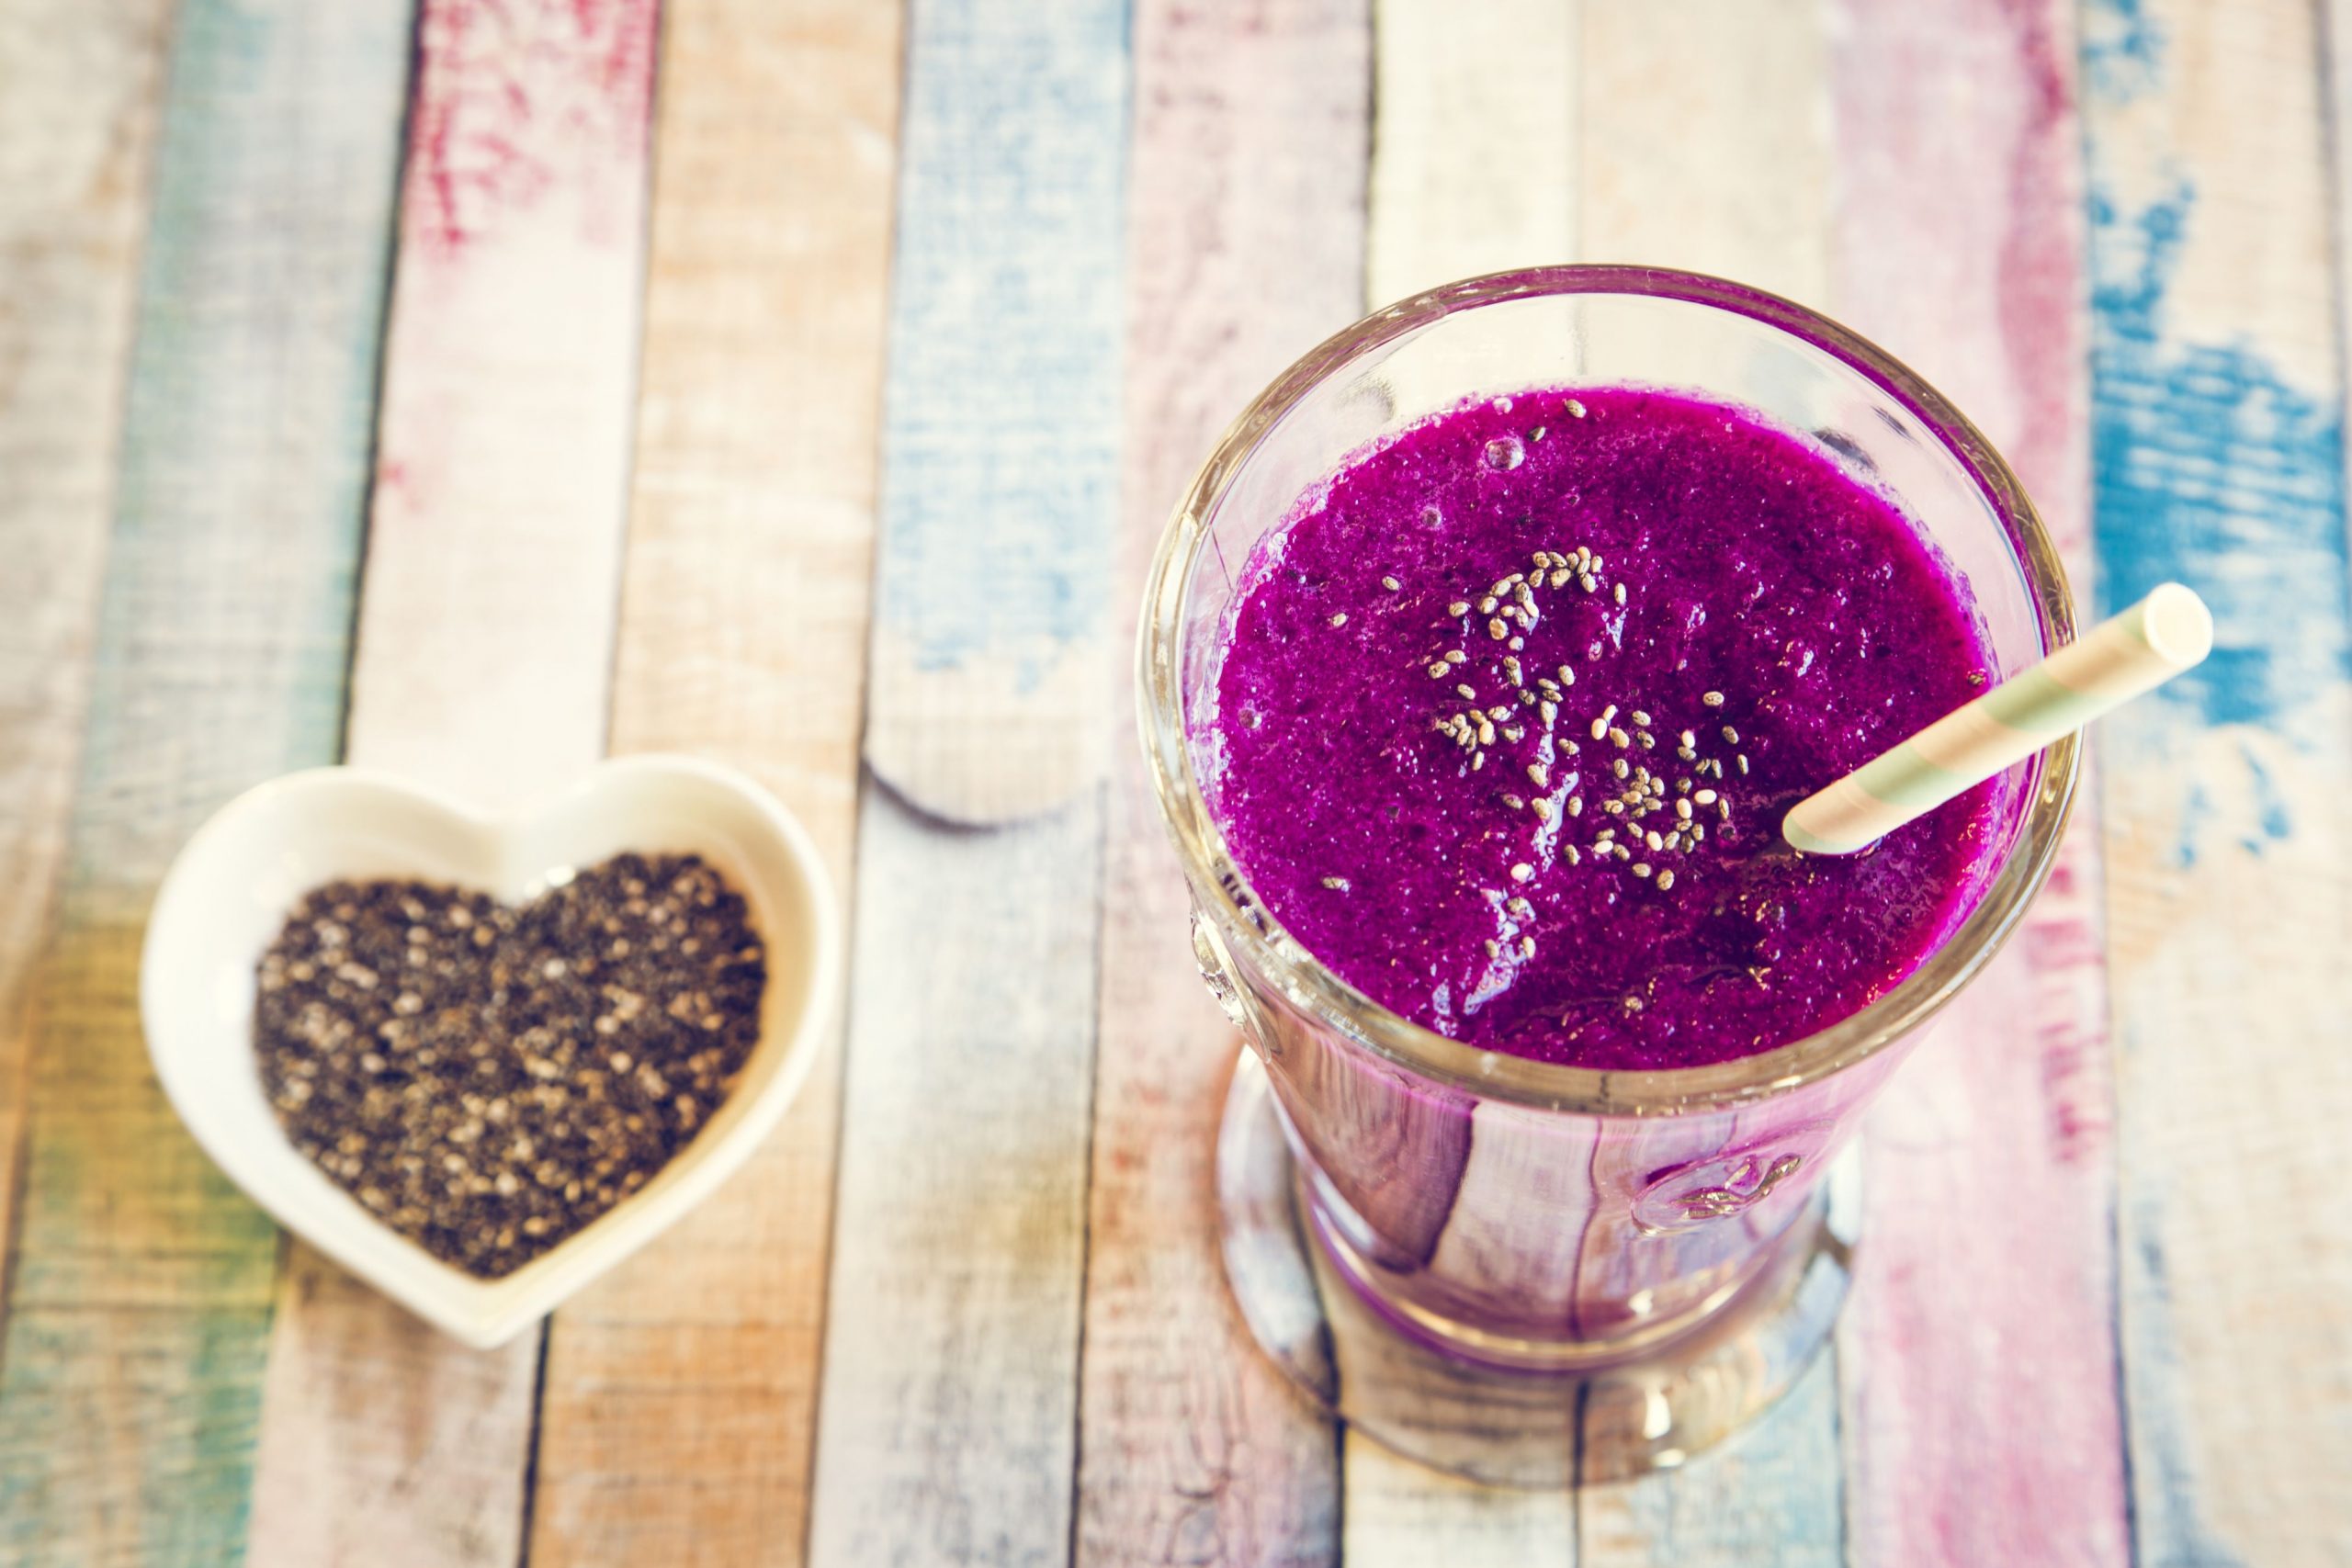 10 Healthy Fruit Smoothies All Under 300 Calories